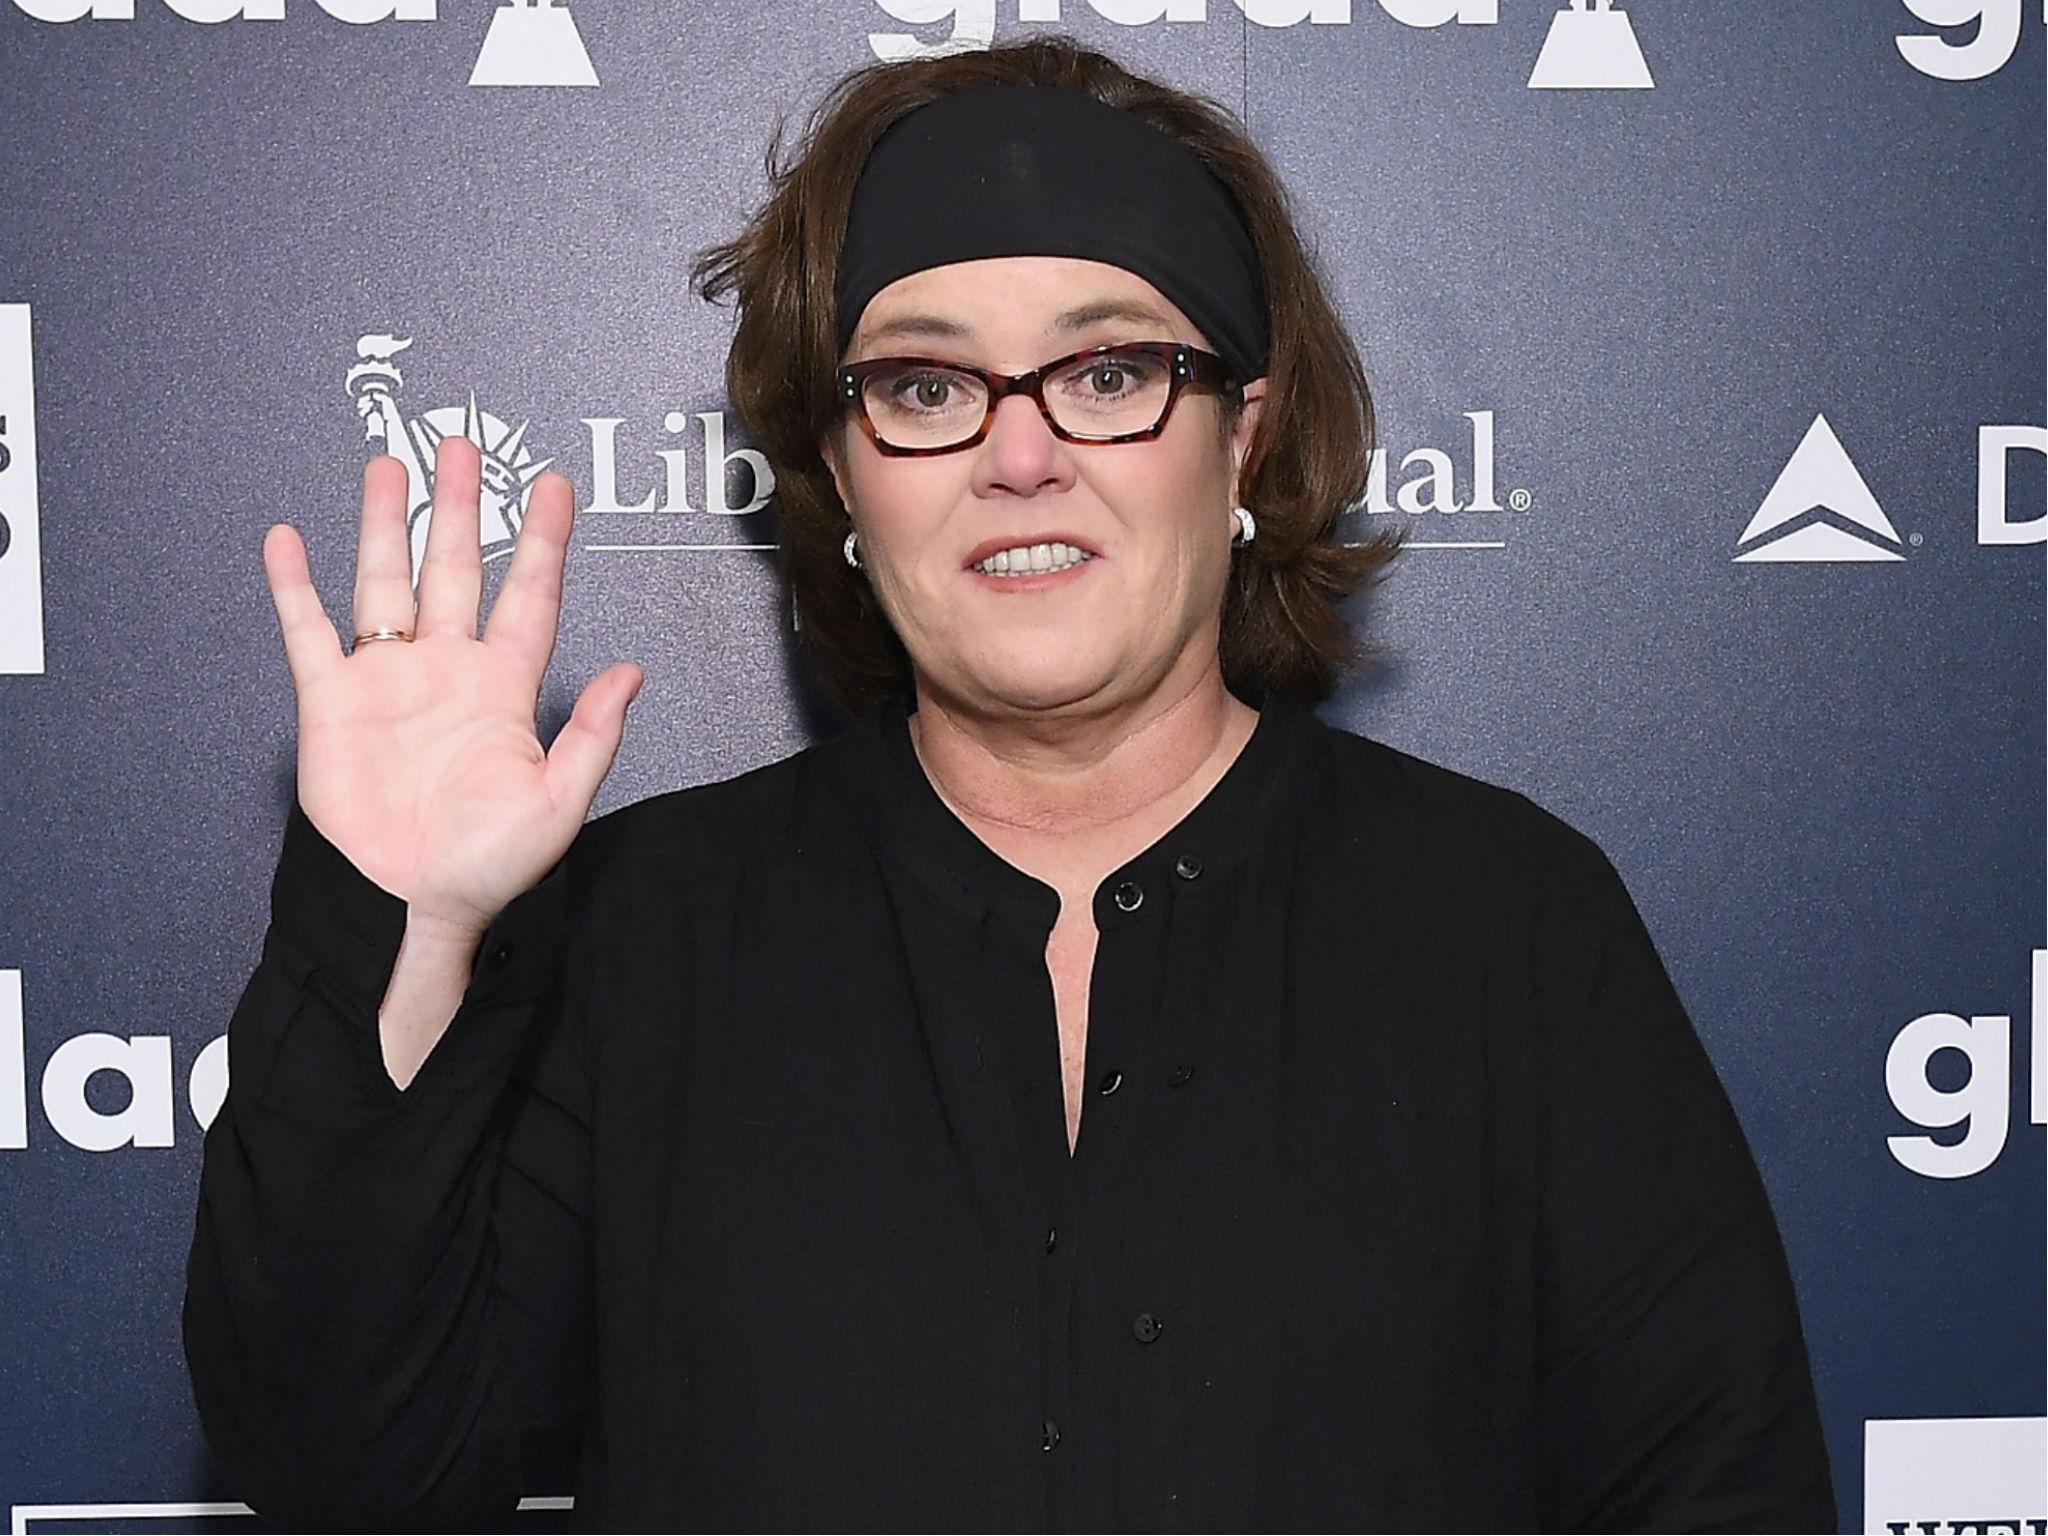 O'Donnell says that Trump trolling her on Twitter is 'no joke'